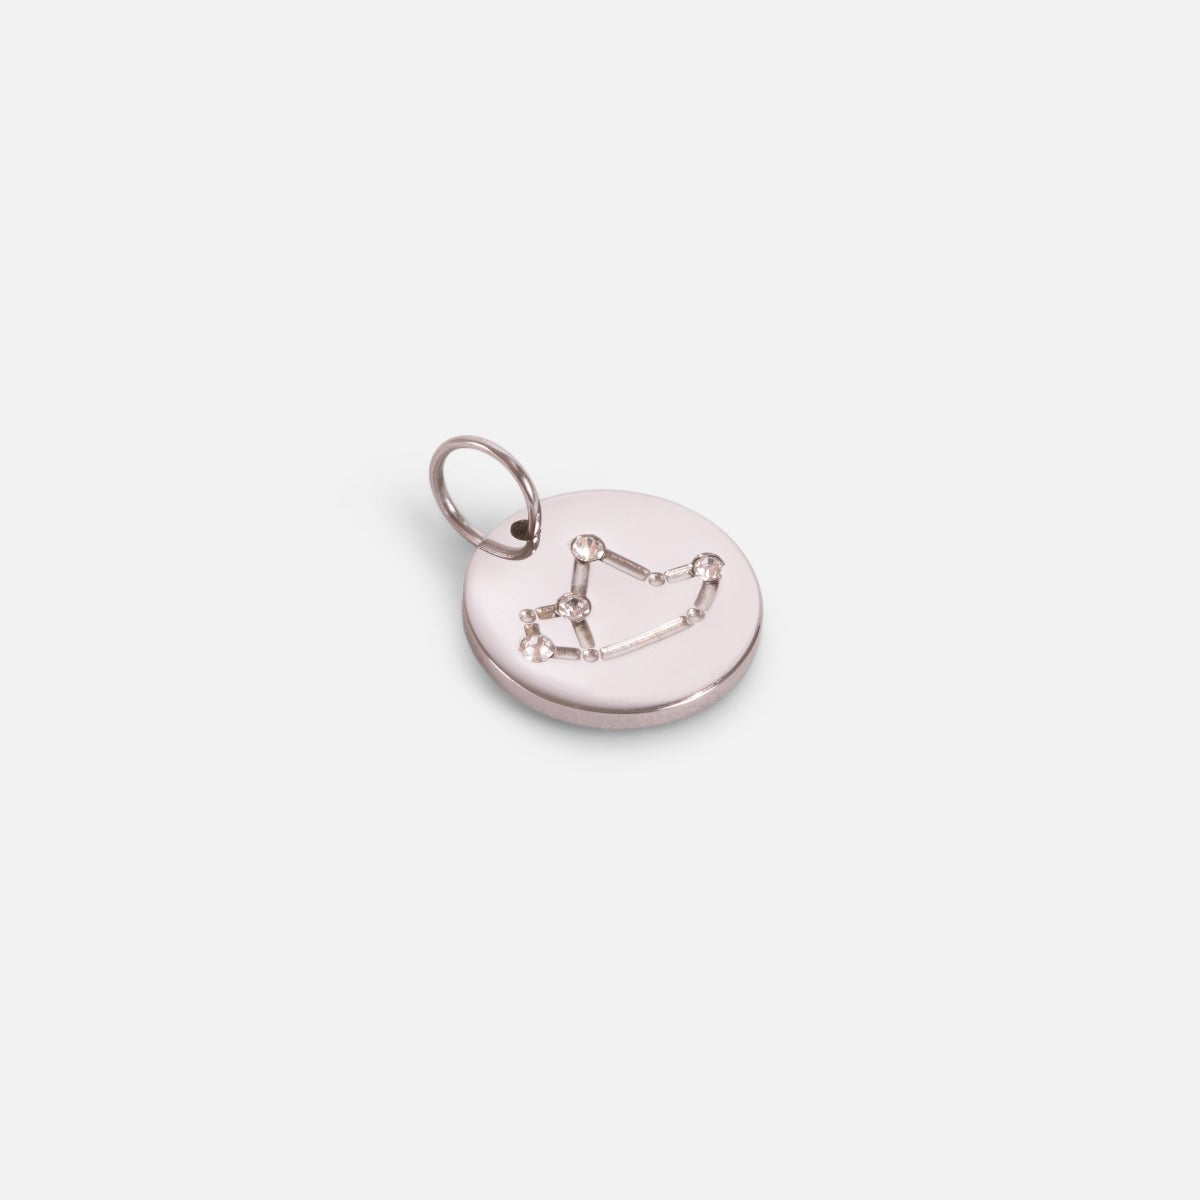 Small silvered charm engraved with the zodiac constellation "sagittarius"